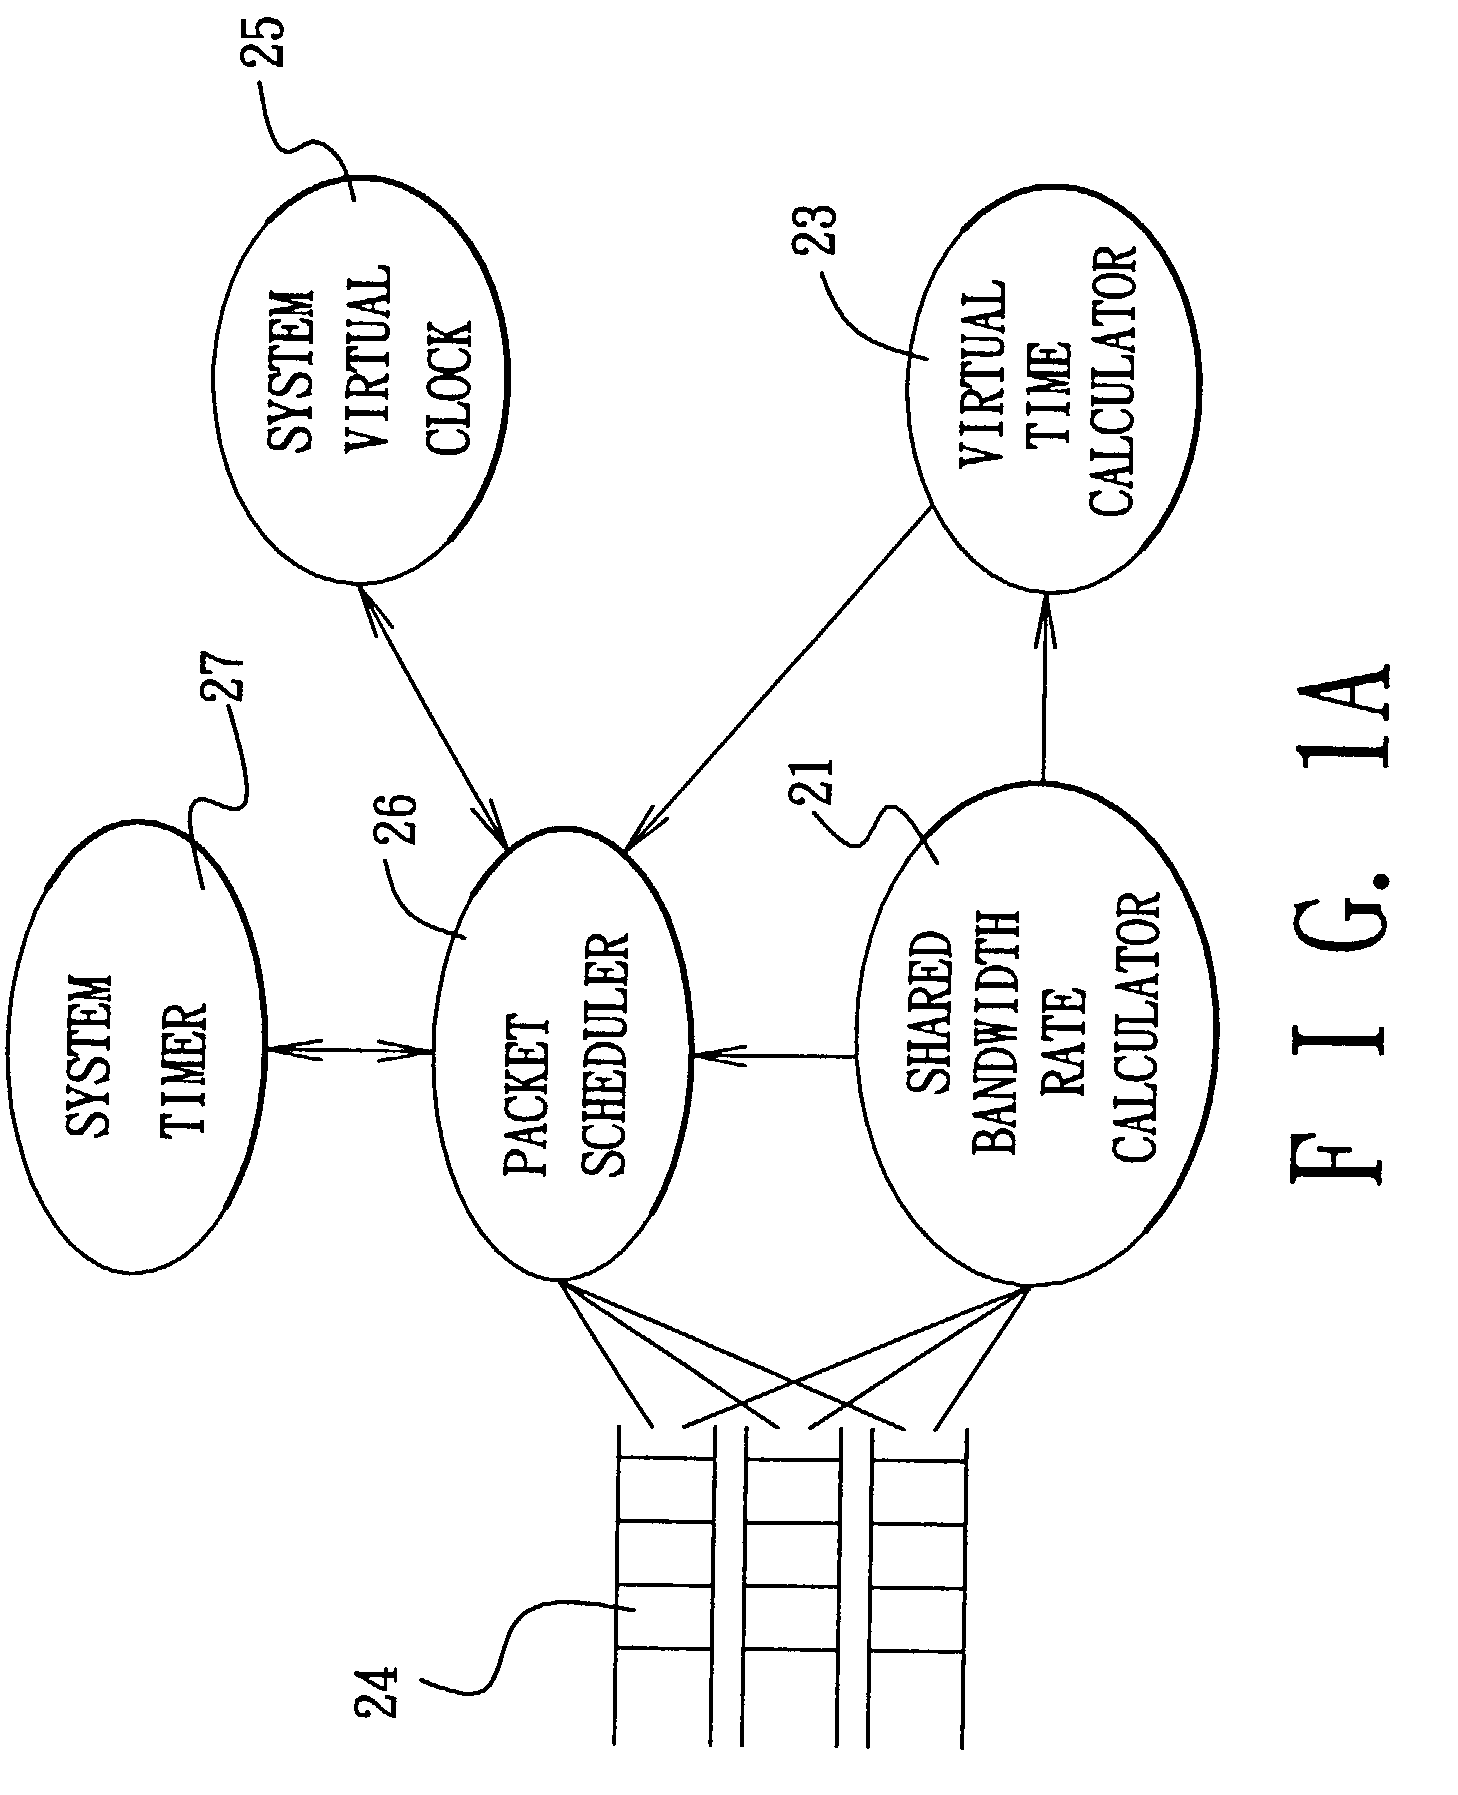 Method and multi-queue packet scheduling system for managing network packet traffic with minimum performance guarantees and maximum service rate control